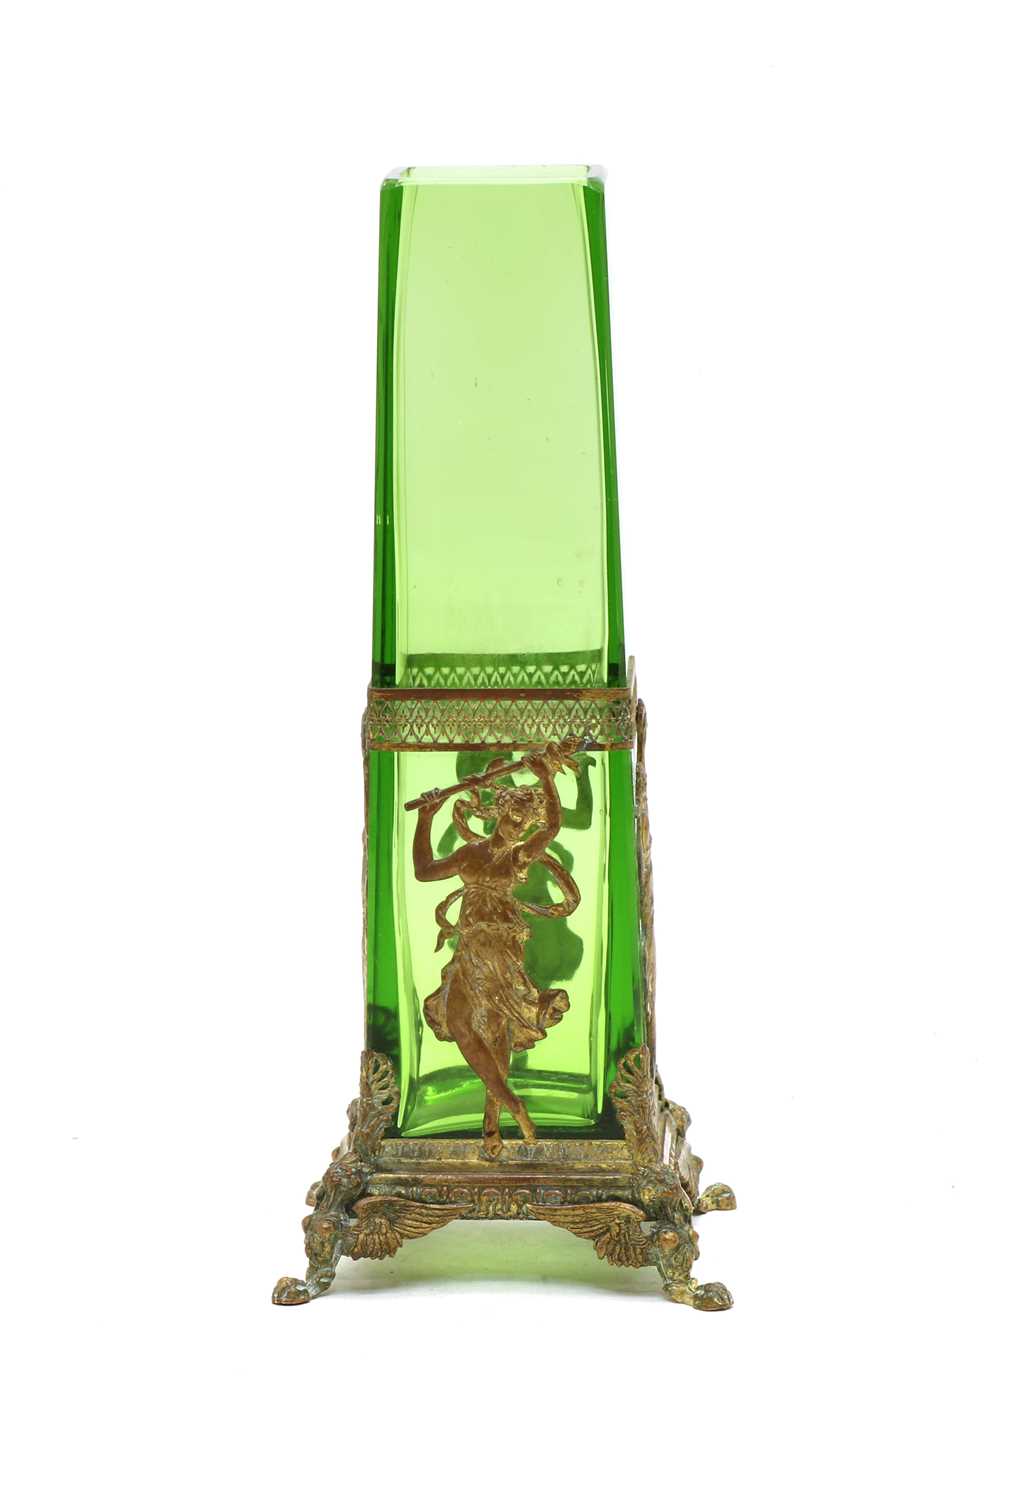 Lot 175 - A French green glass and metal mounted spill vase